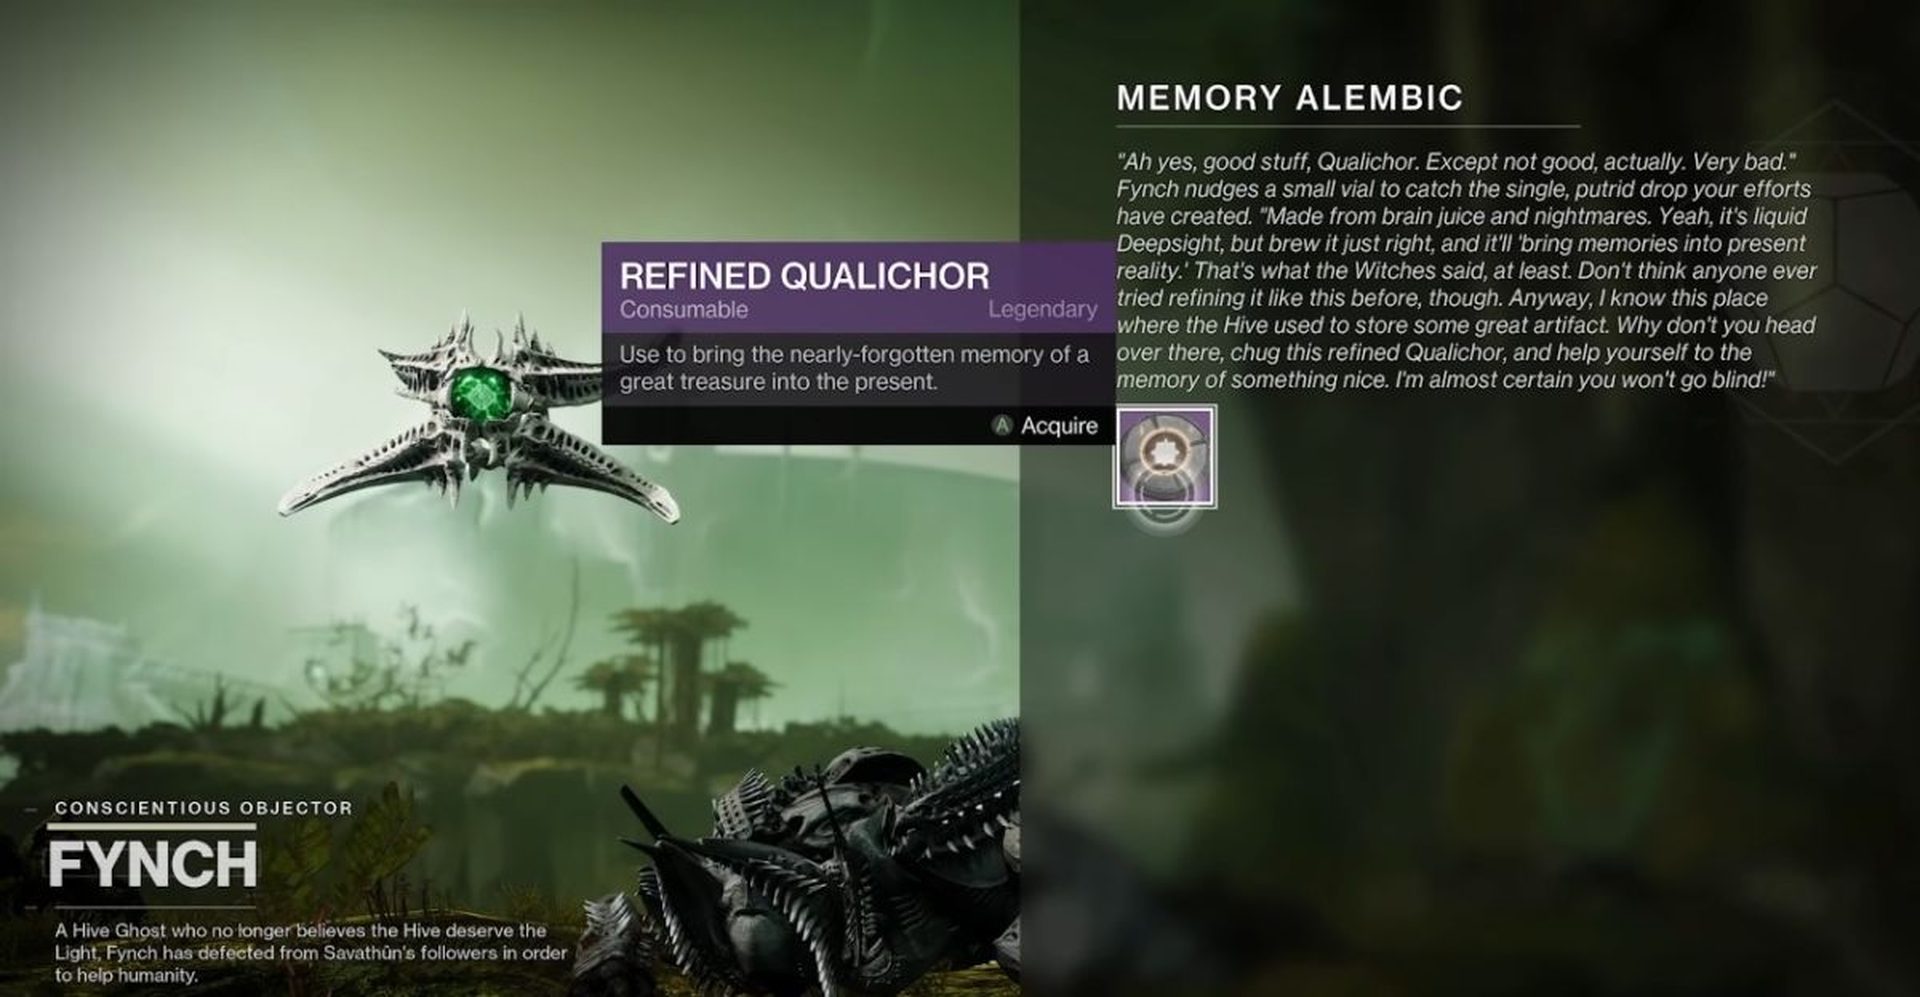 How to complete the Destiny 2 Memory Alembic quest? 